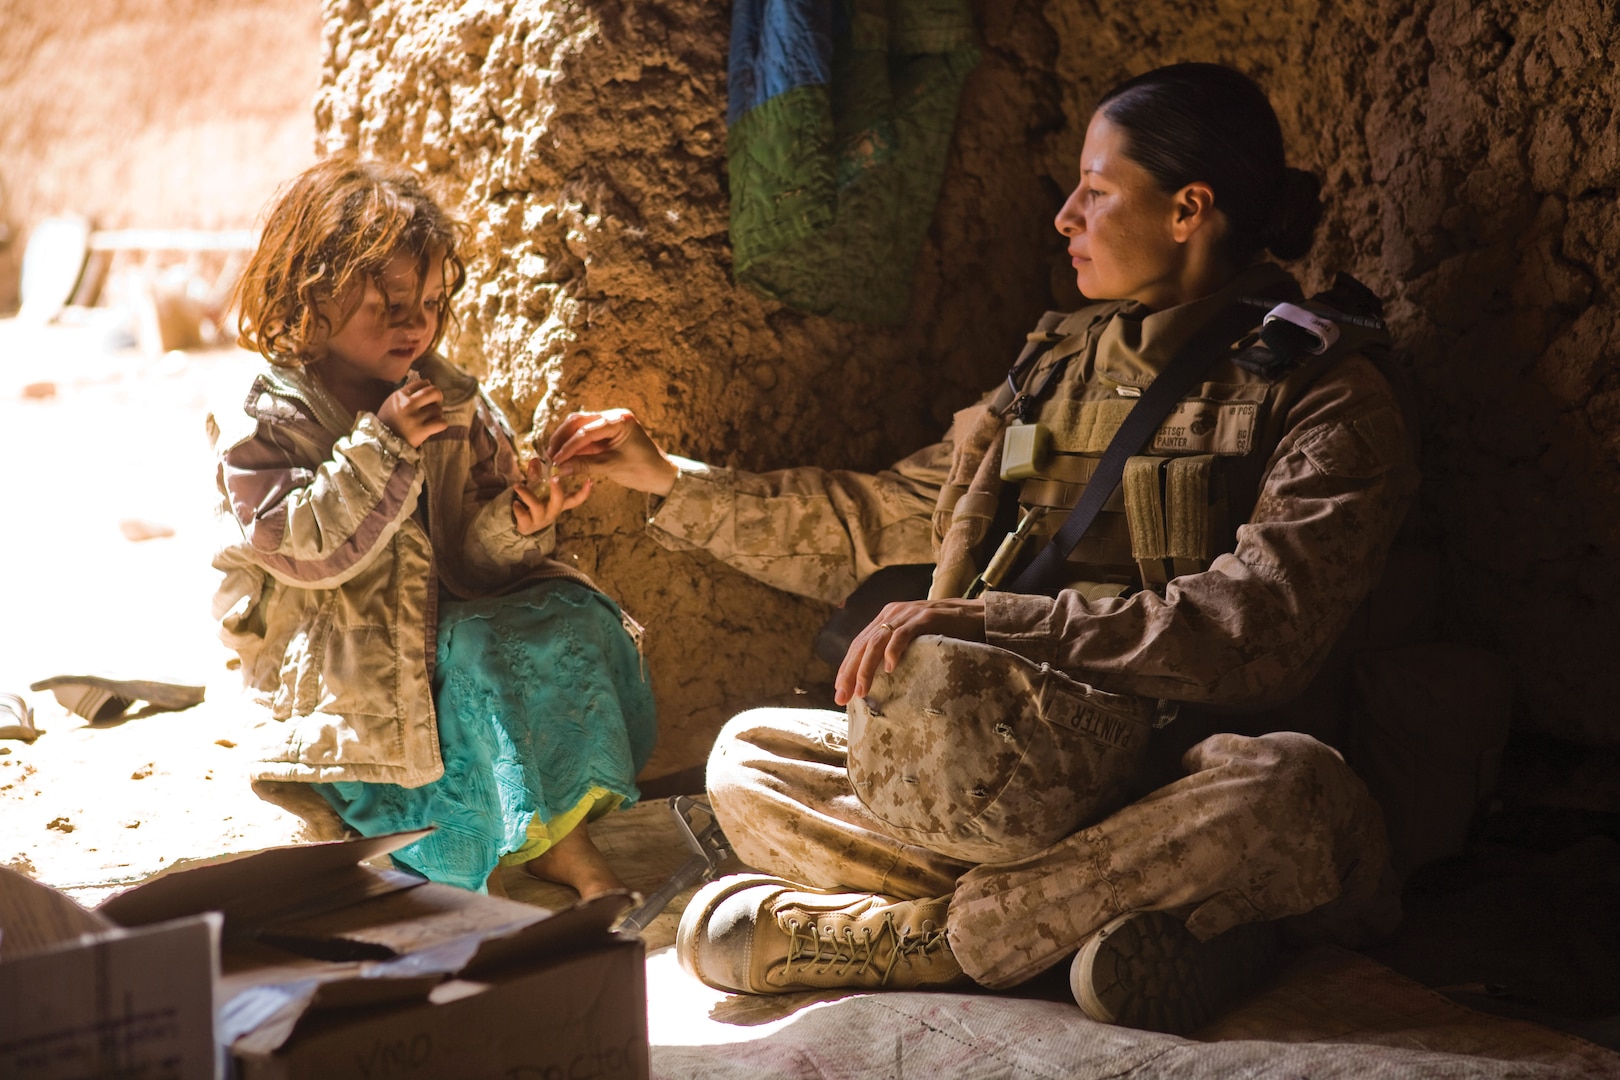 Member of a U.S. Marine Corps Female Engagement Team watches over an Afghan girl while the girl’s
mother receives medical attention from another team member.